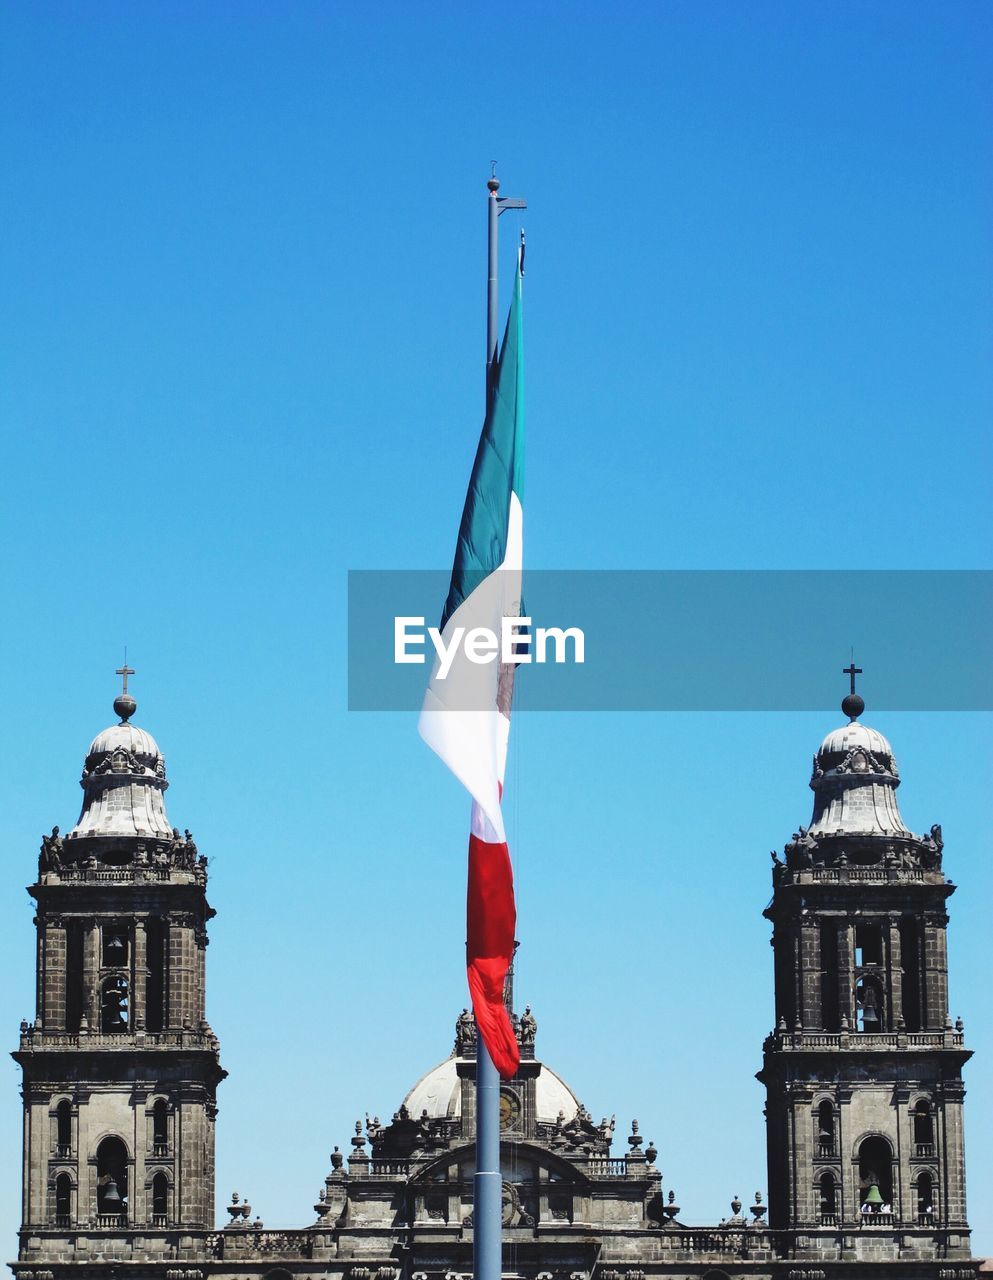 Mexican flag by metropolitan cathedral against clear blue sky